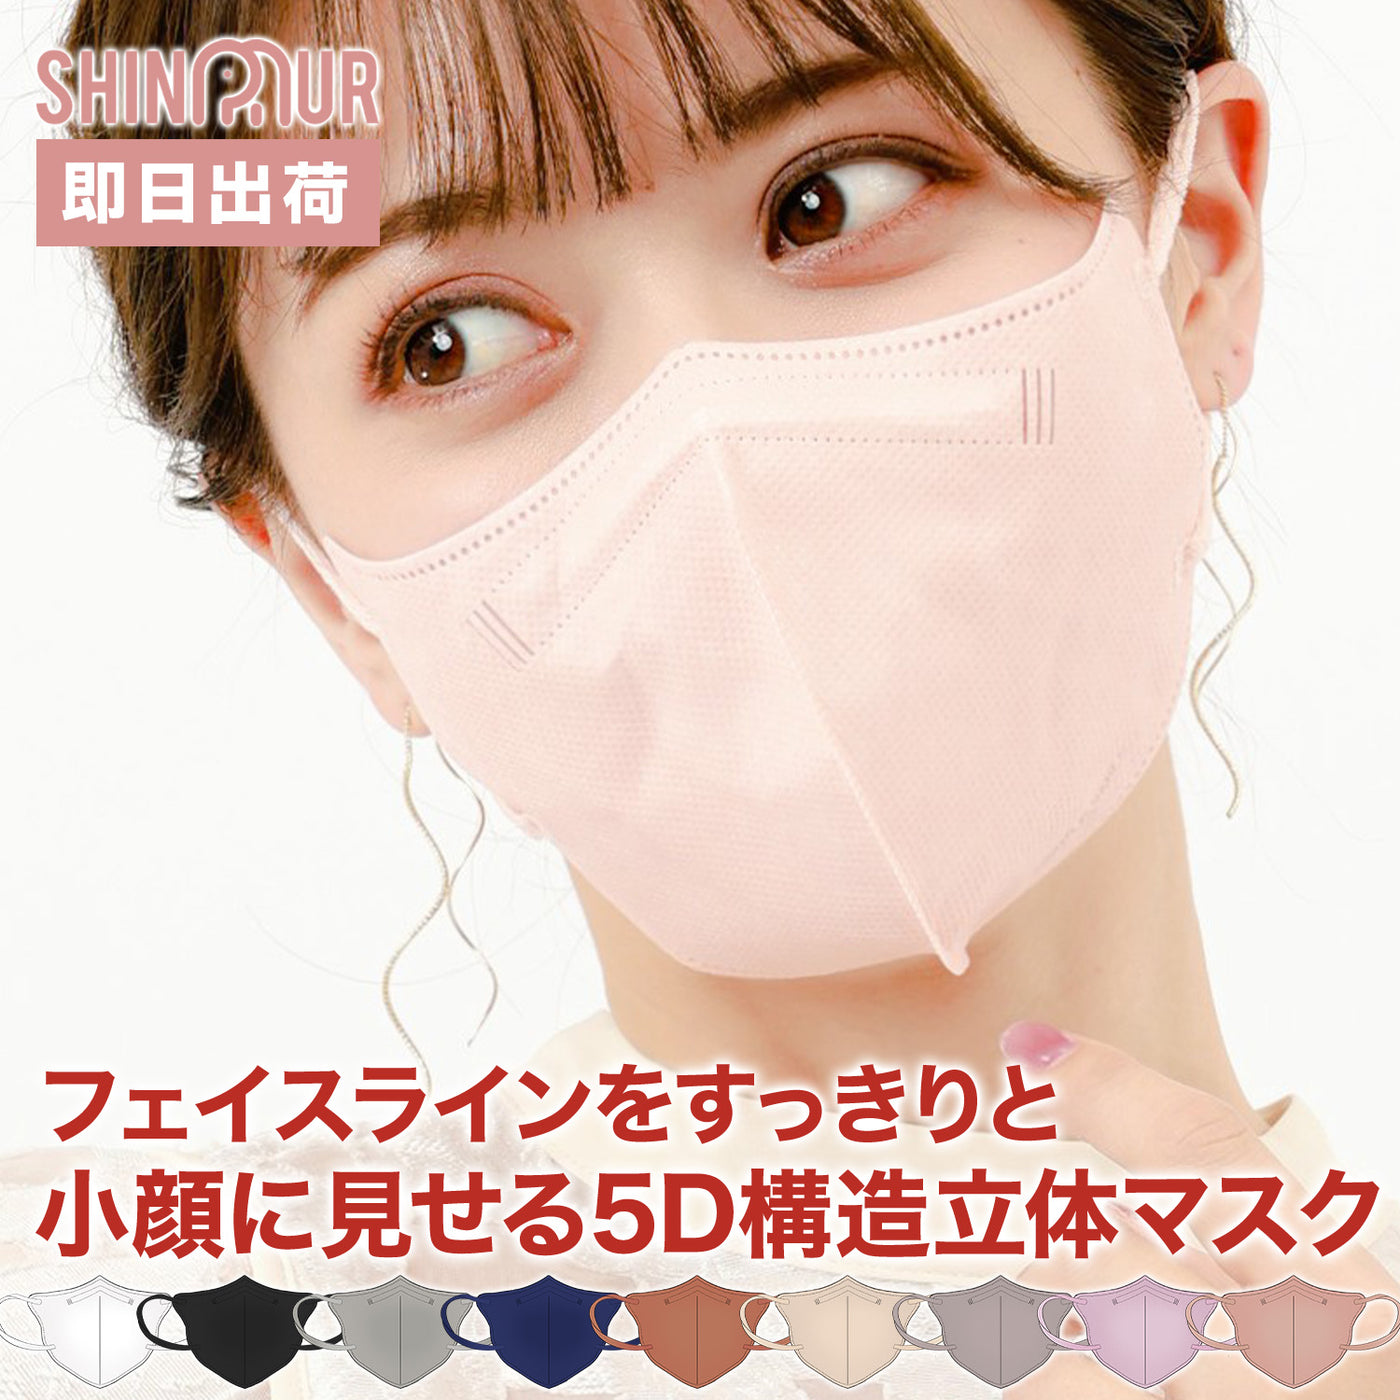 SHINPUR ® 公式 DAILY SPACE MASK SN99 5Dマスク 20枚入